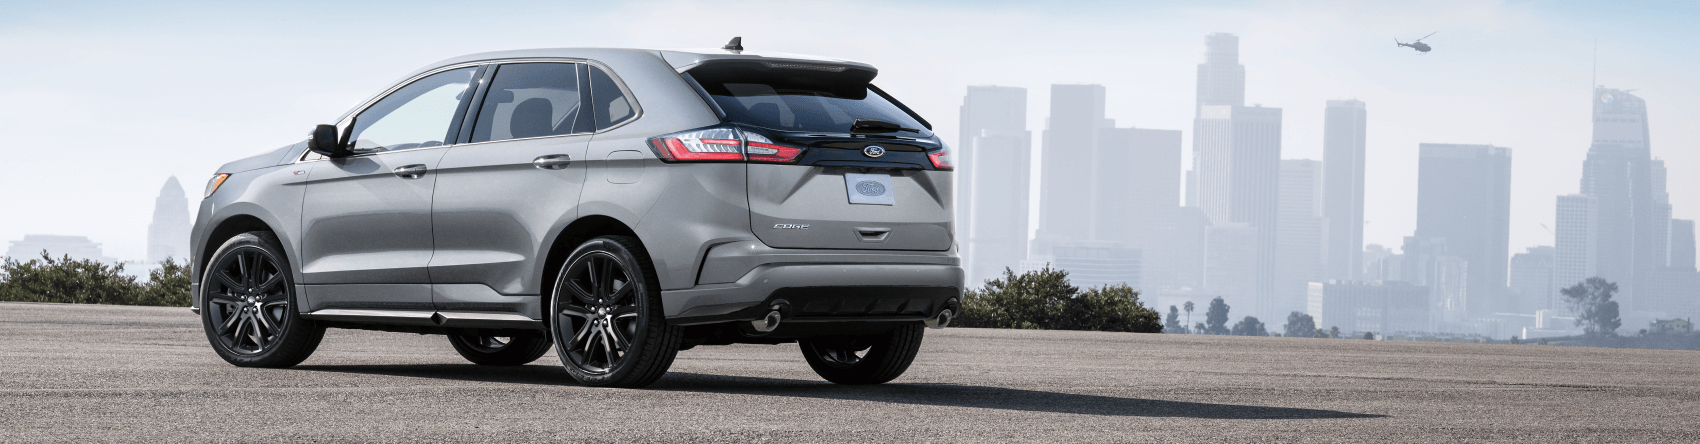 2021 Ford Edge Silver Outside City